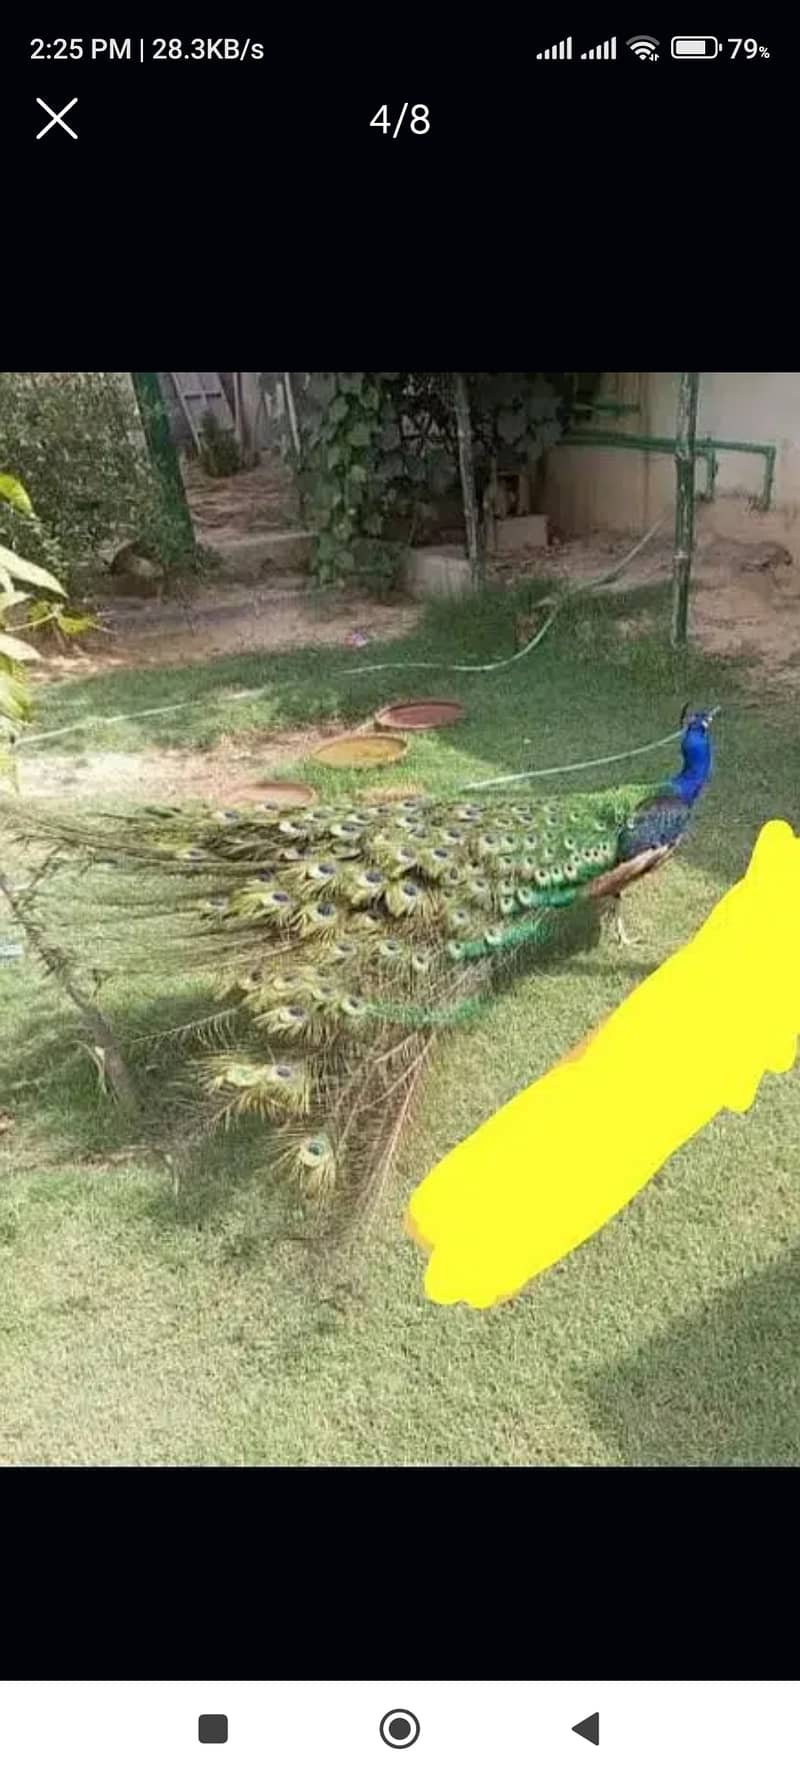 peacocks 1 year 4 years available. cargo possible. contact WhatsApp 3